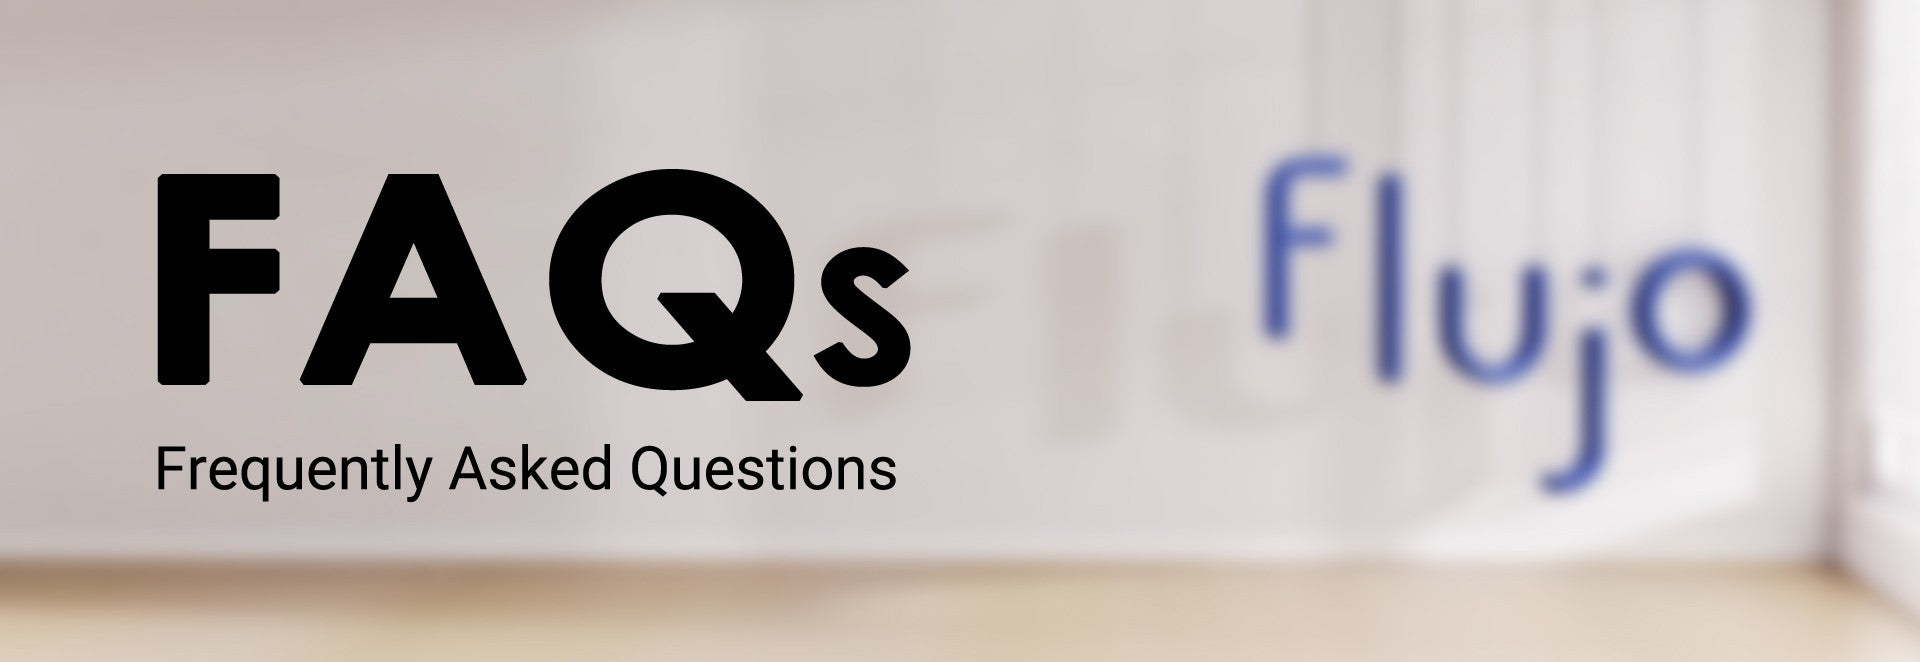 Header image for the Frequently Asked Questions section on Flujo's website, with the acronym 'FAQs' in large letters and the Flujo logo blurred in the background.